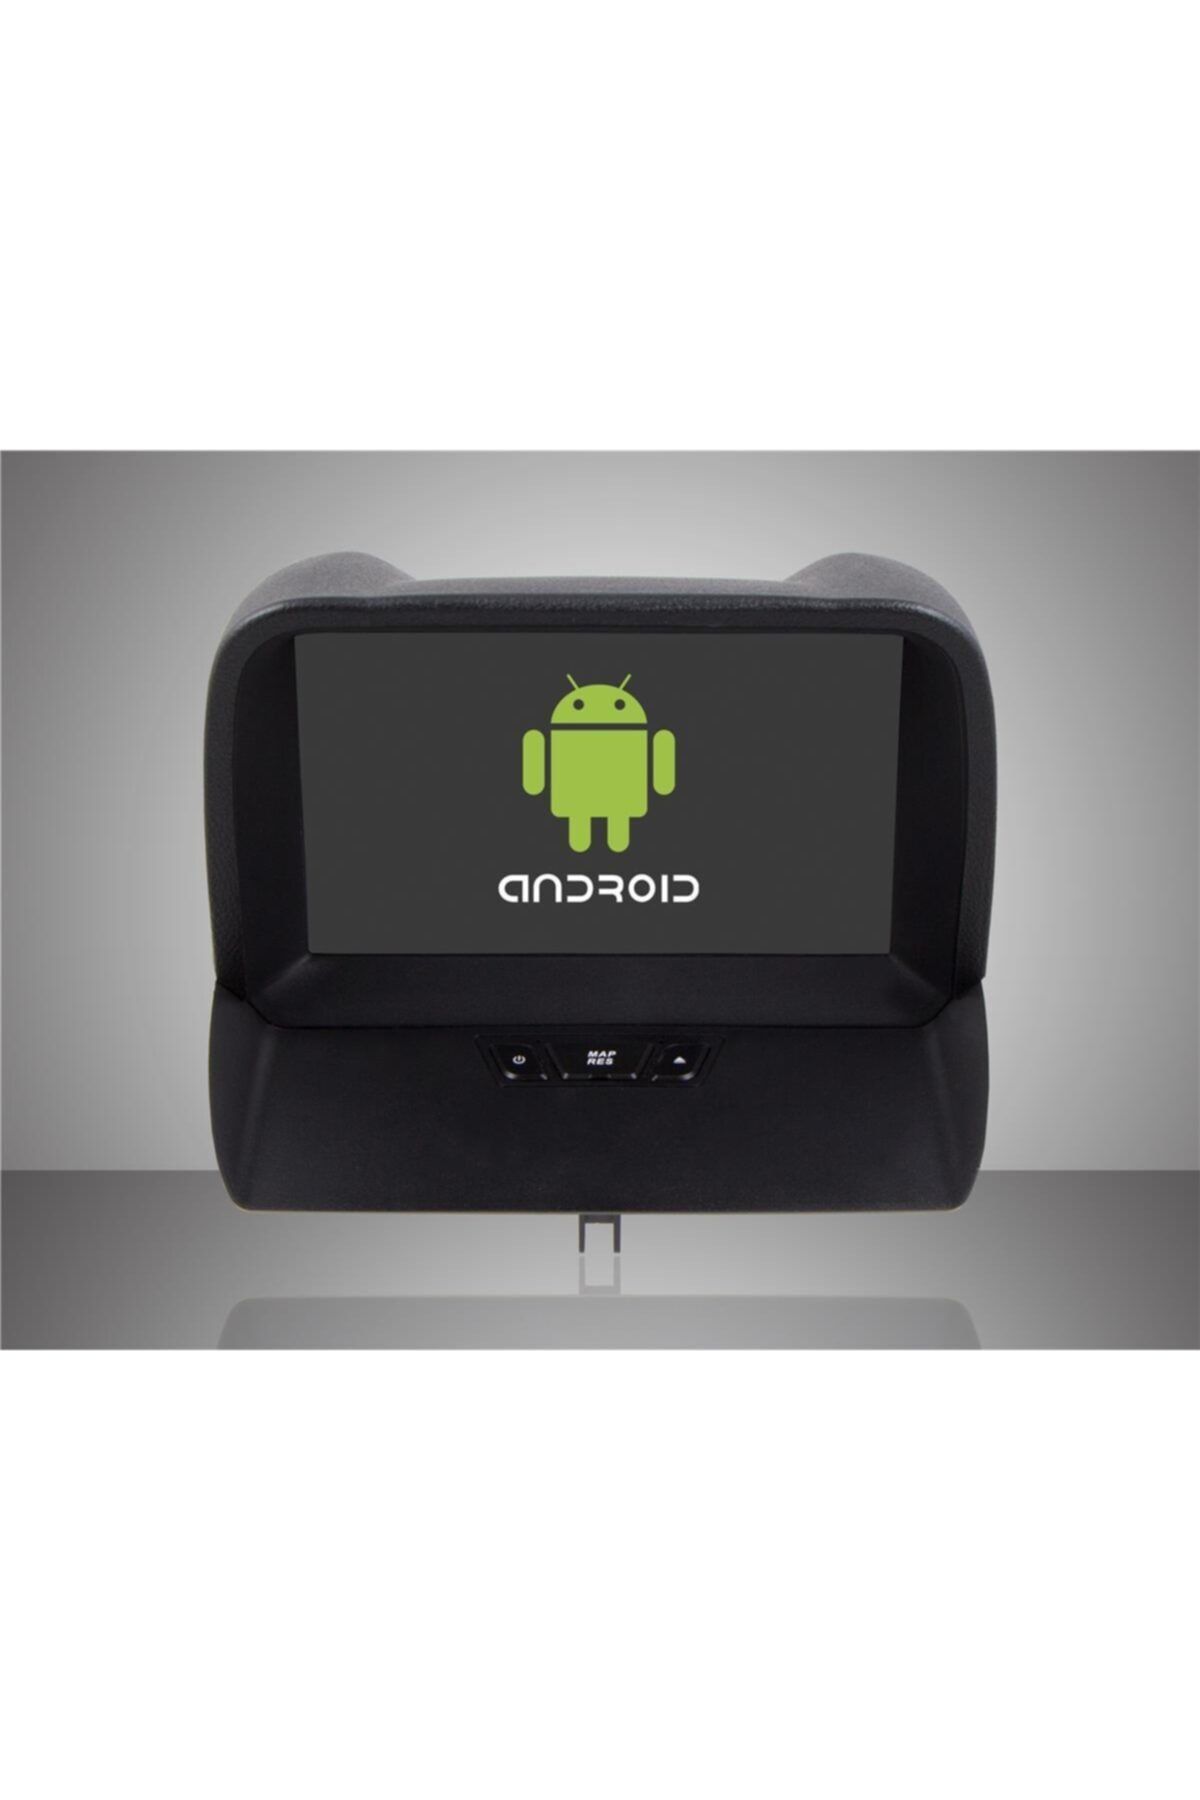 For-X Ford Courier Multimedya Navigasyon Android 10.0 Hd Oem Gps Usb Bt